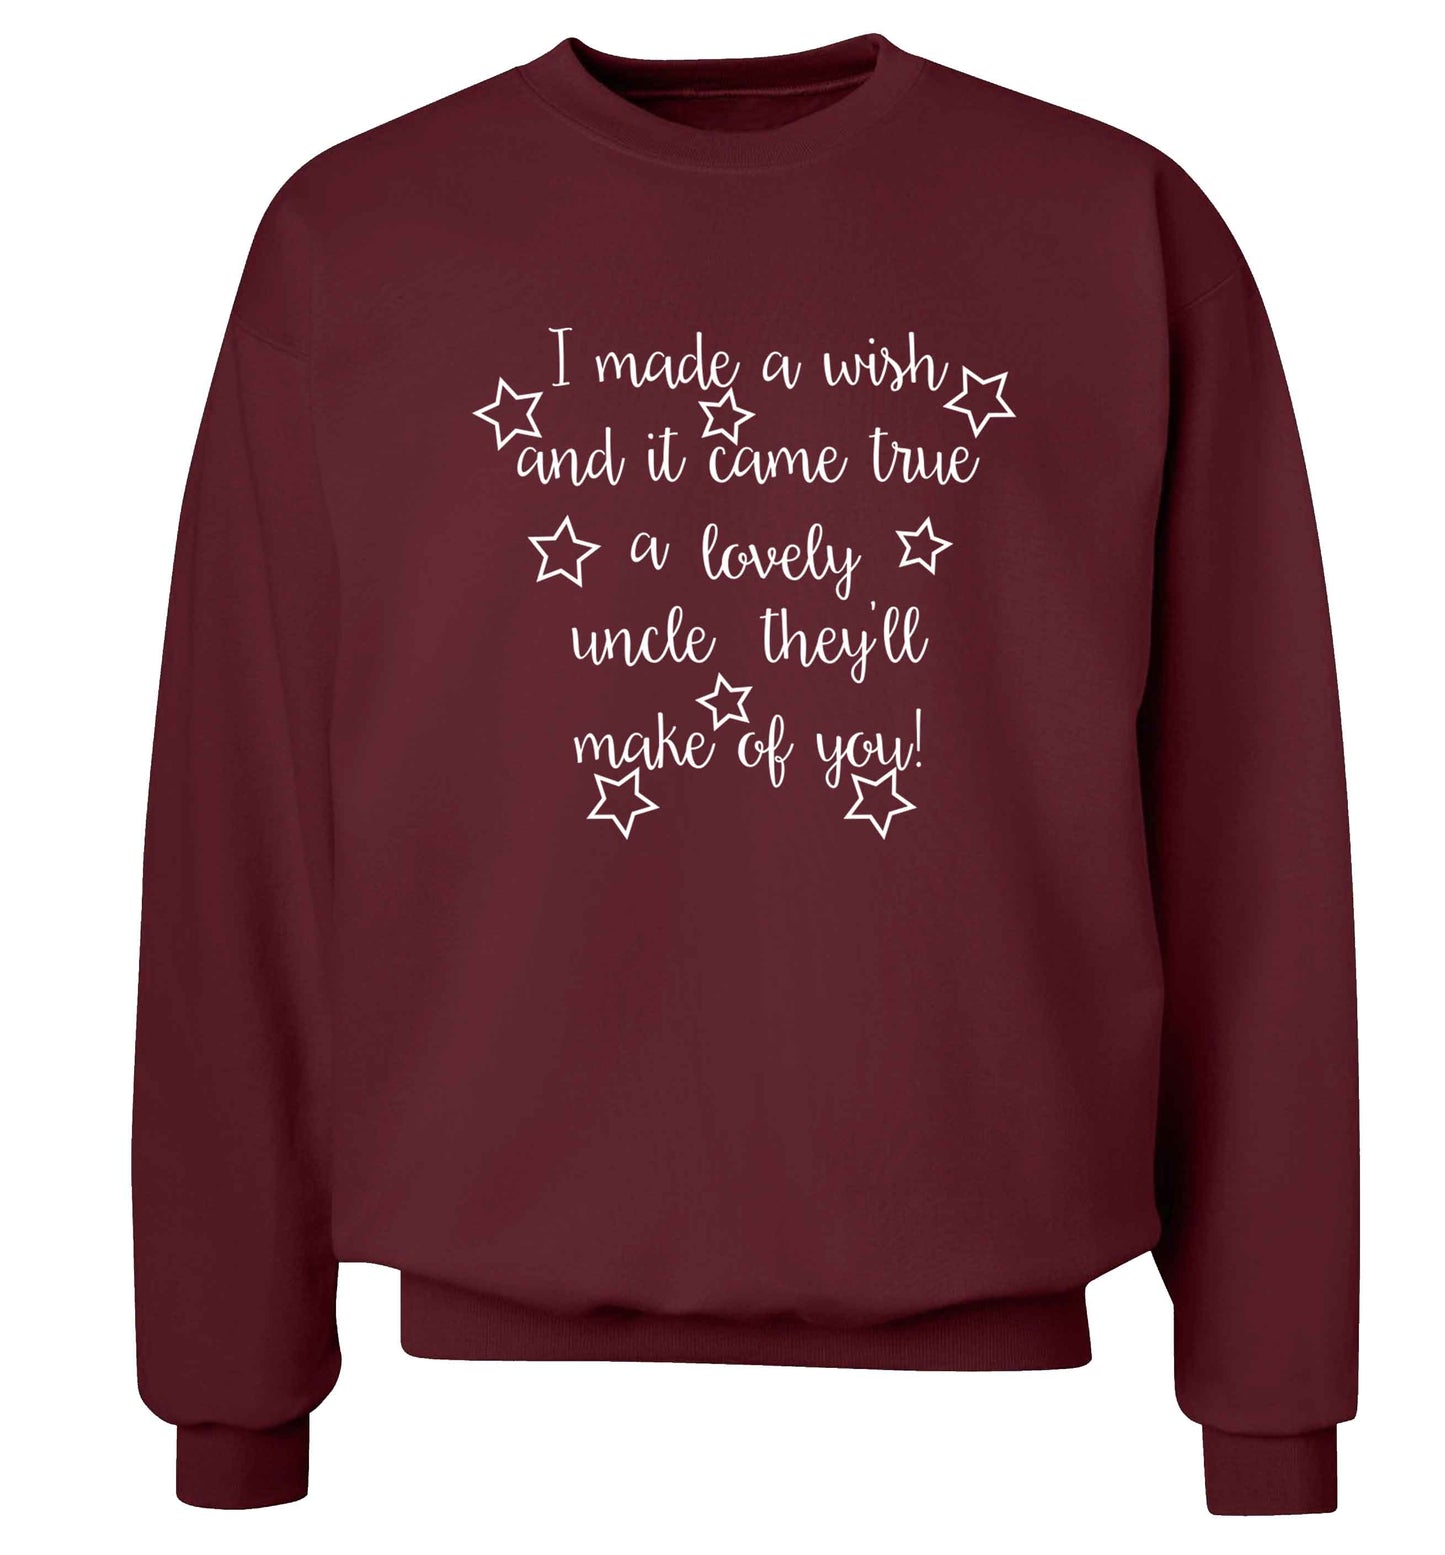 I made a wish and it came true a lovely uncle they'll make of you! Adult's unisex maroon Sweater 2XL